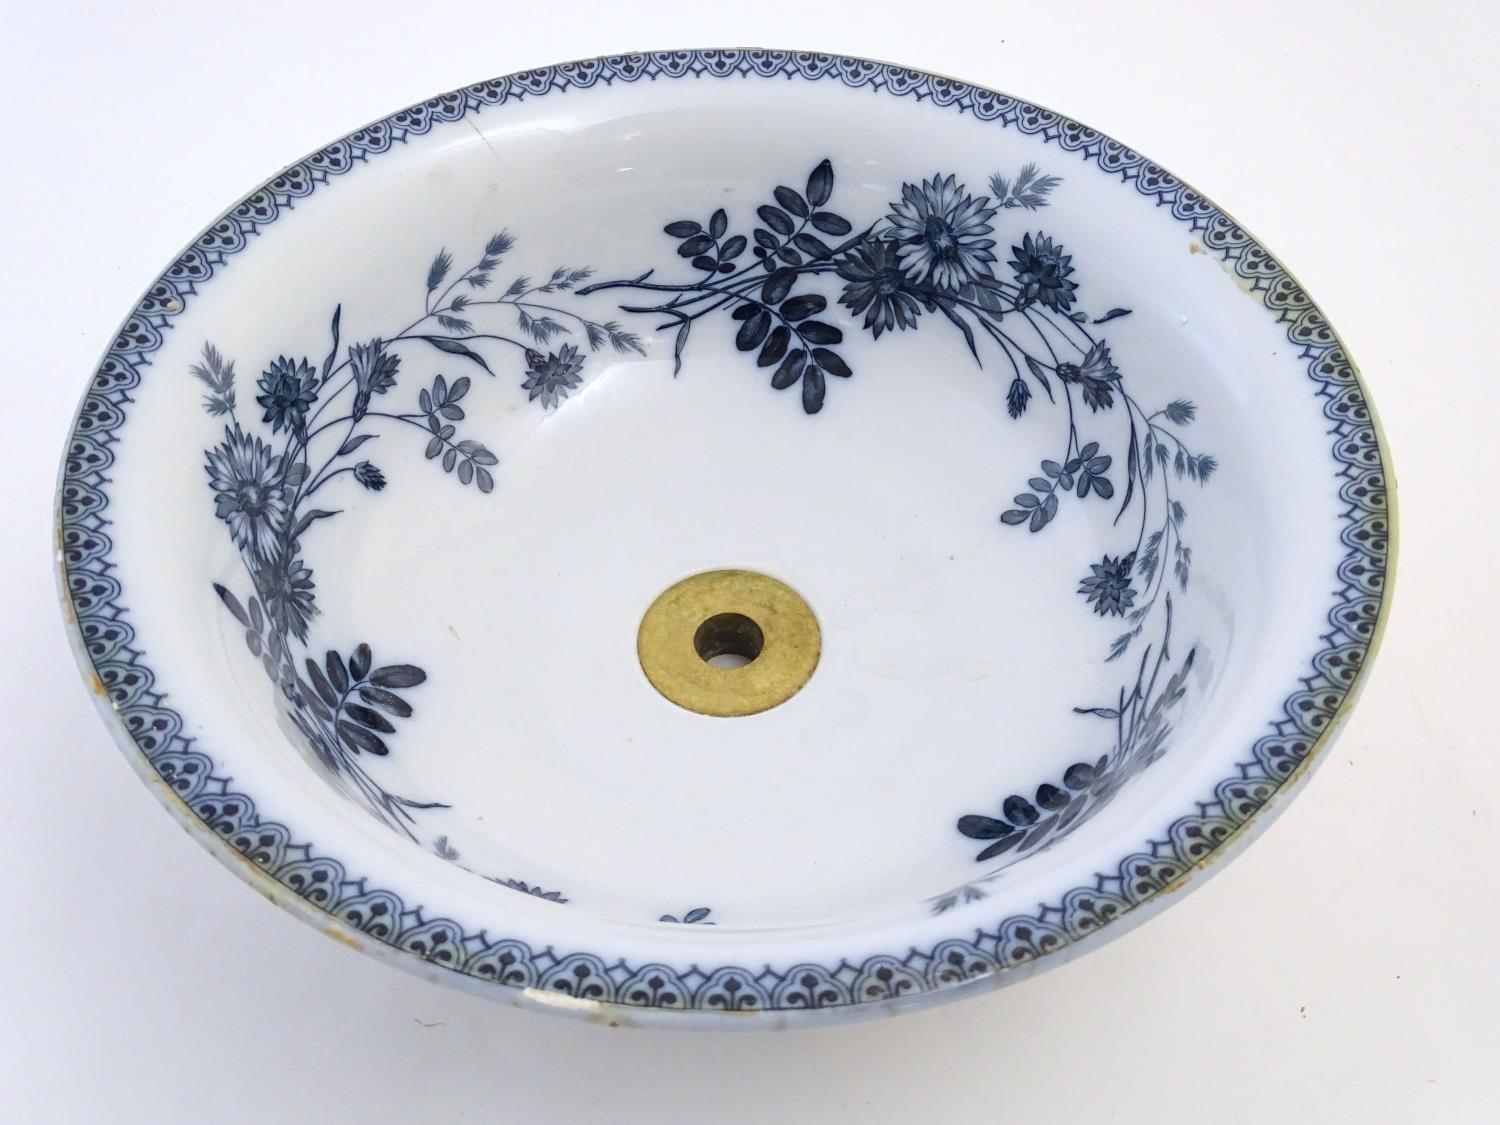 A Victorian Villeroy and Boch blue and white circular sink in the pattern Cyanus with floral and